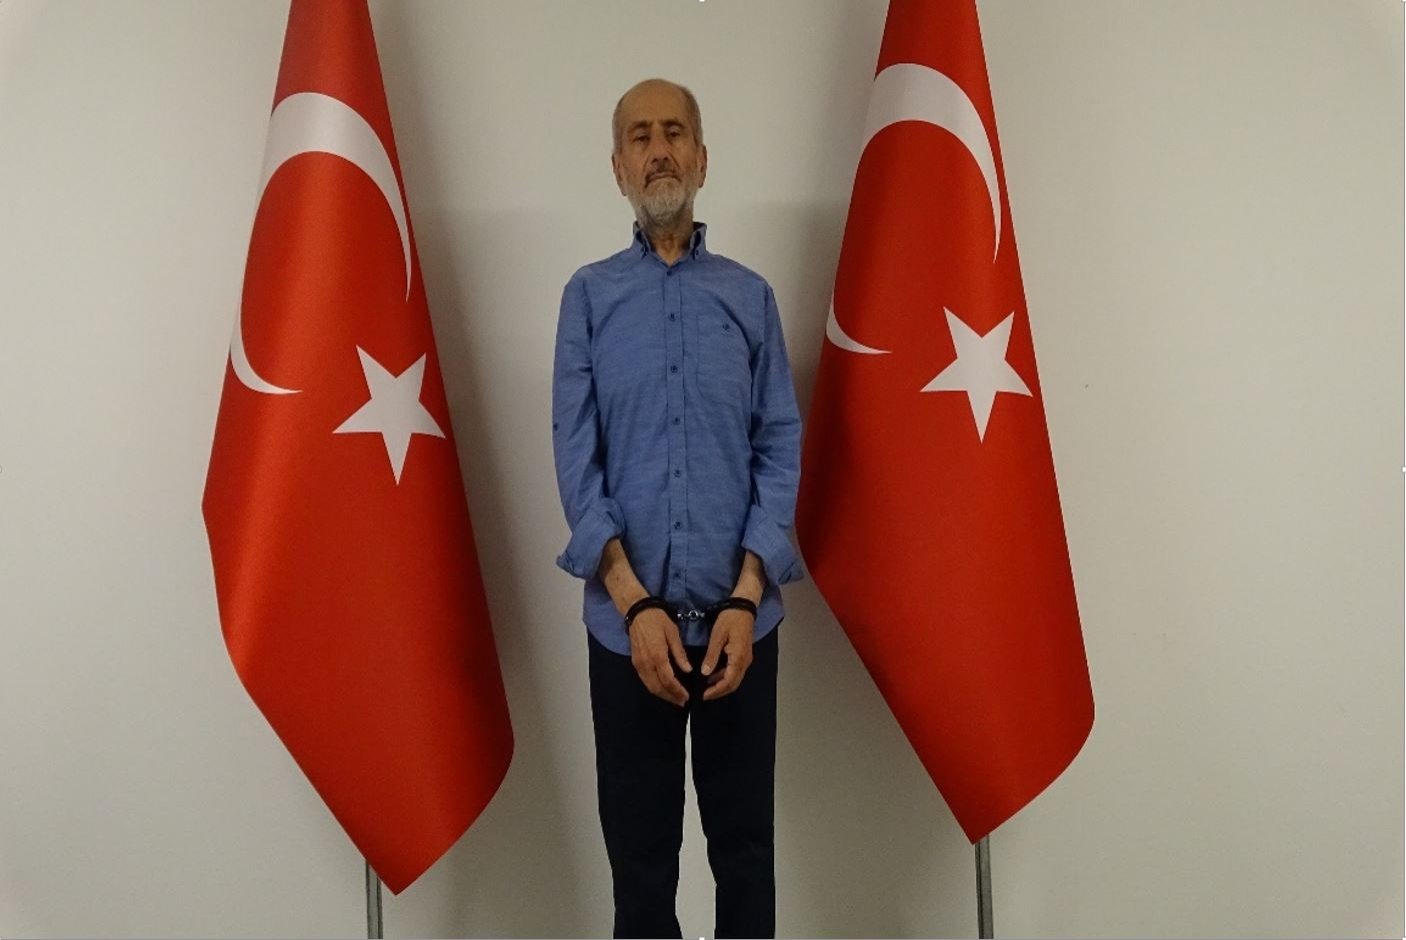 Greek National Intelligence Organization (EYP) spy Mohammed Amar Ampara, seen with handcuffs in front of two Turkish flags, after being caught by the National Intelligence Organization (MIT), Ankara, Turkey, June 25, 2022. (DHA Photo)